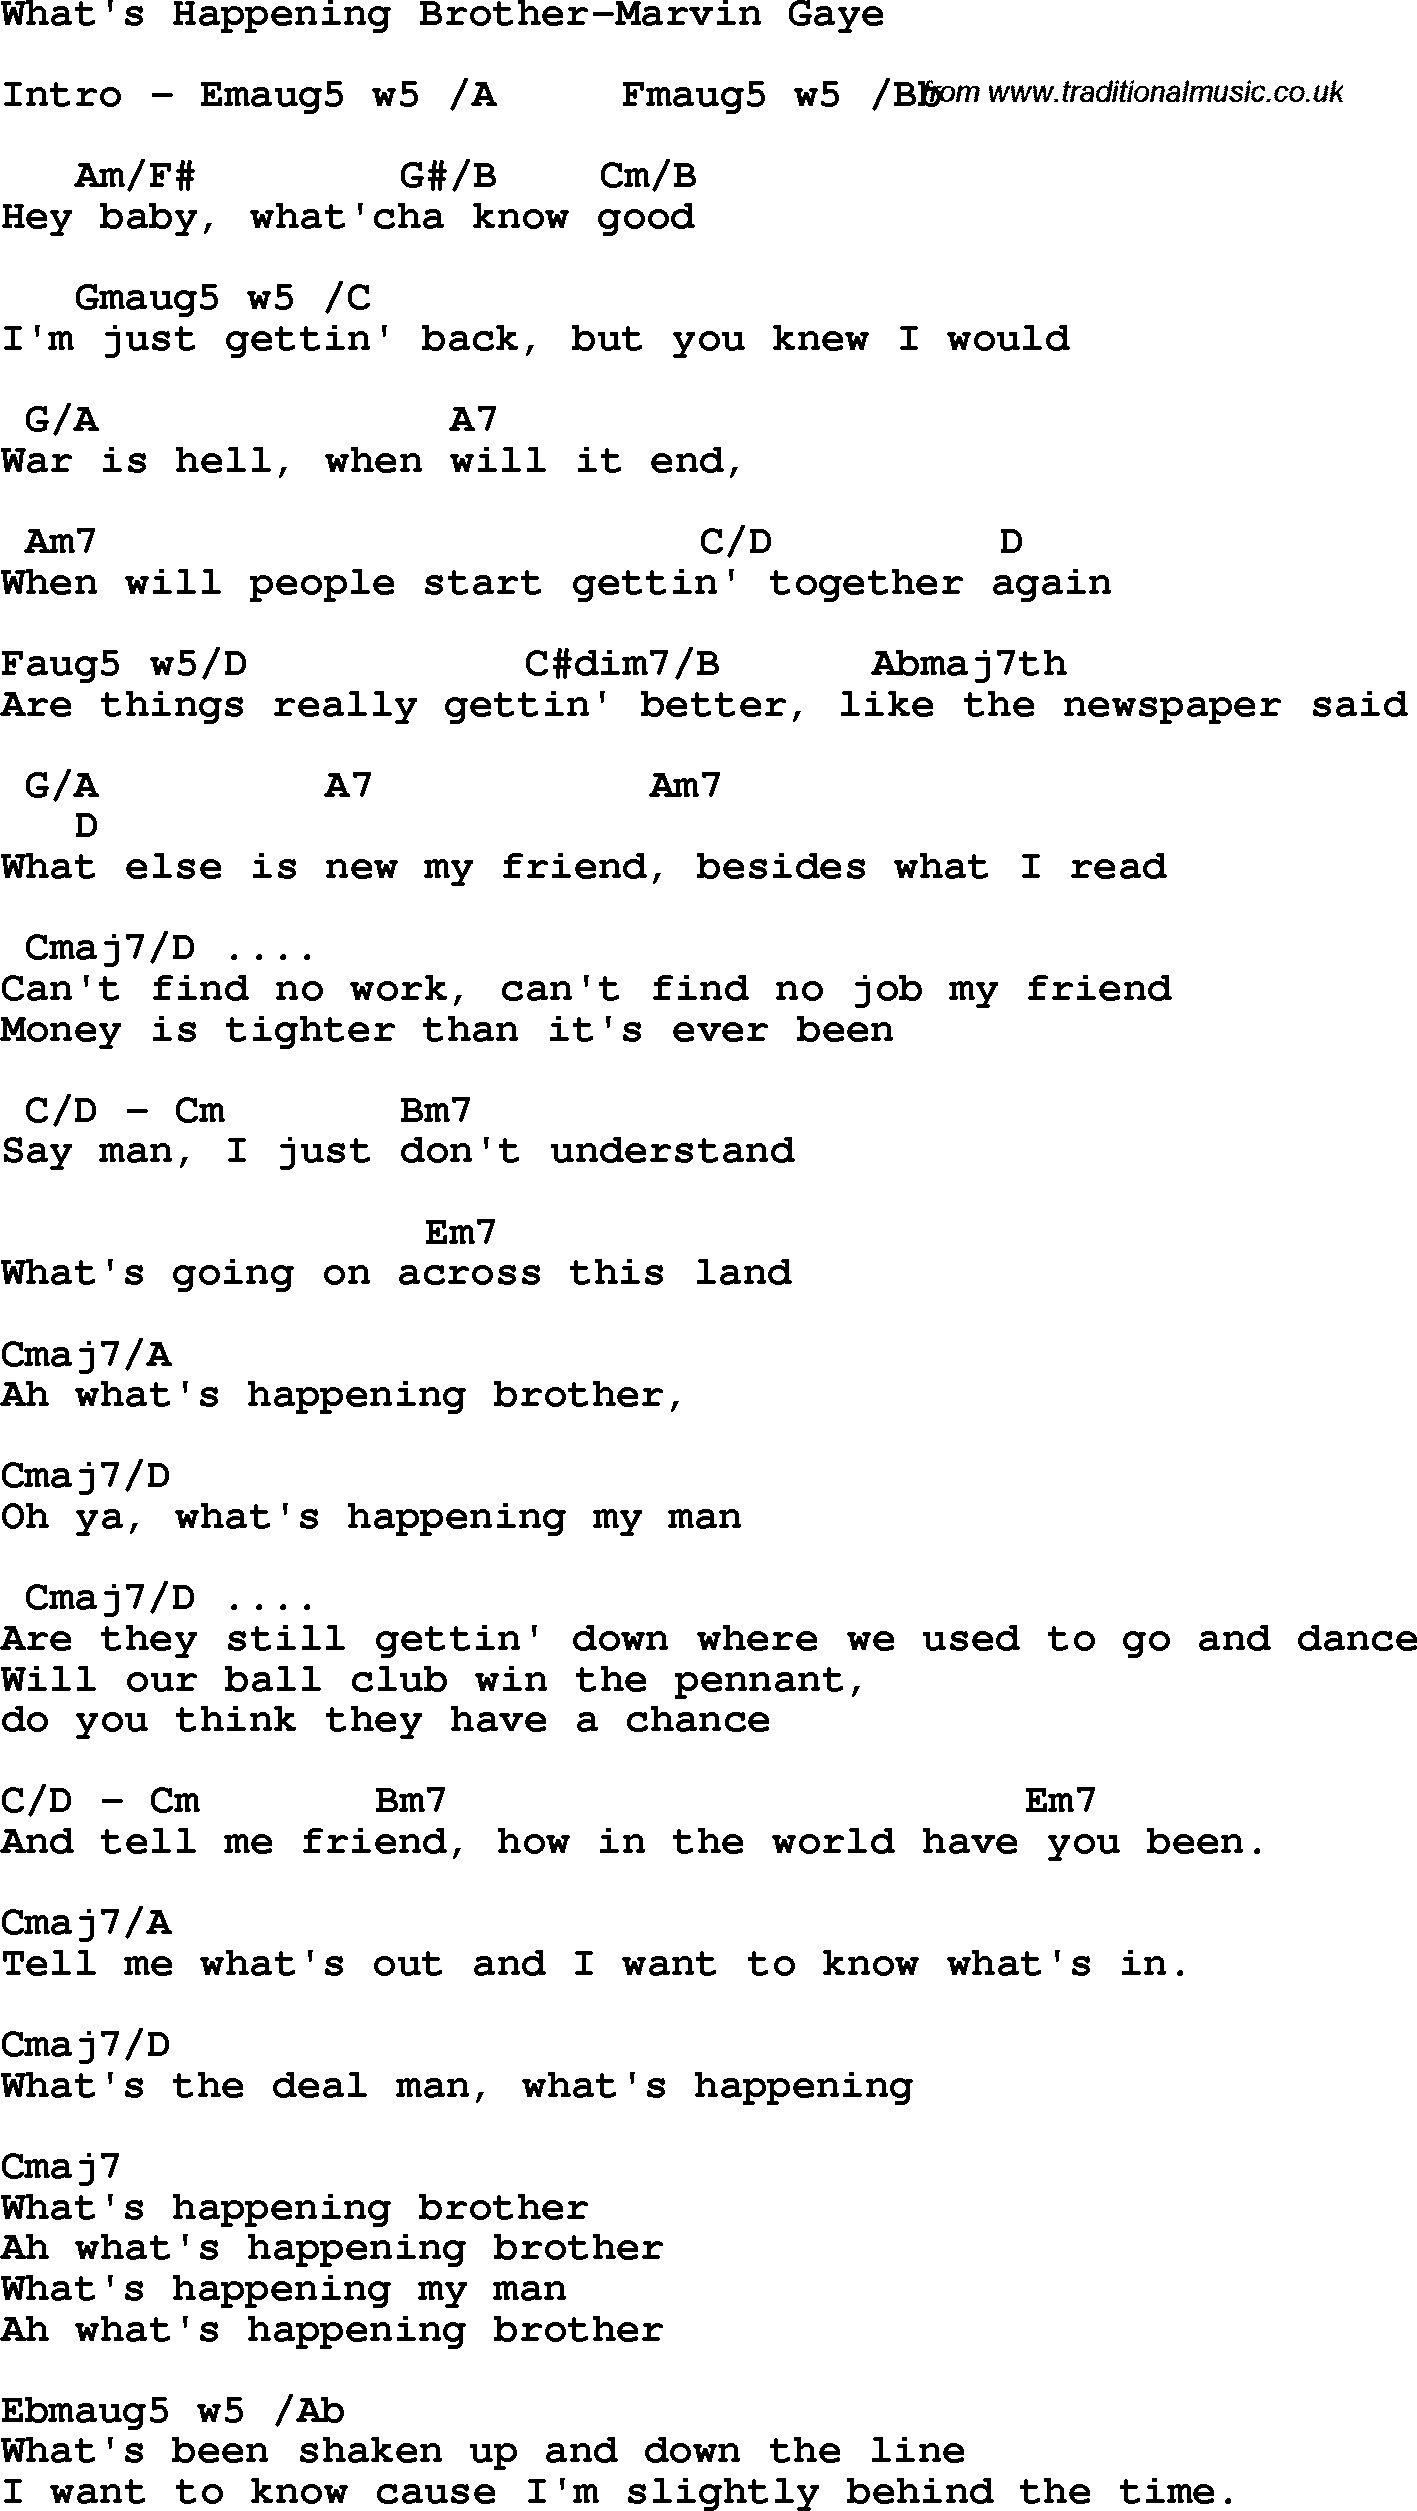 What's Going On Chords Protest Song Whats Happening Brother Marvin Gaye Lyrics And Chords